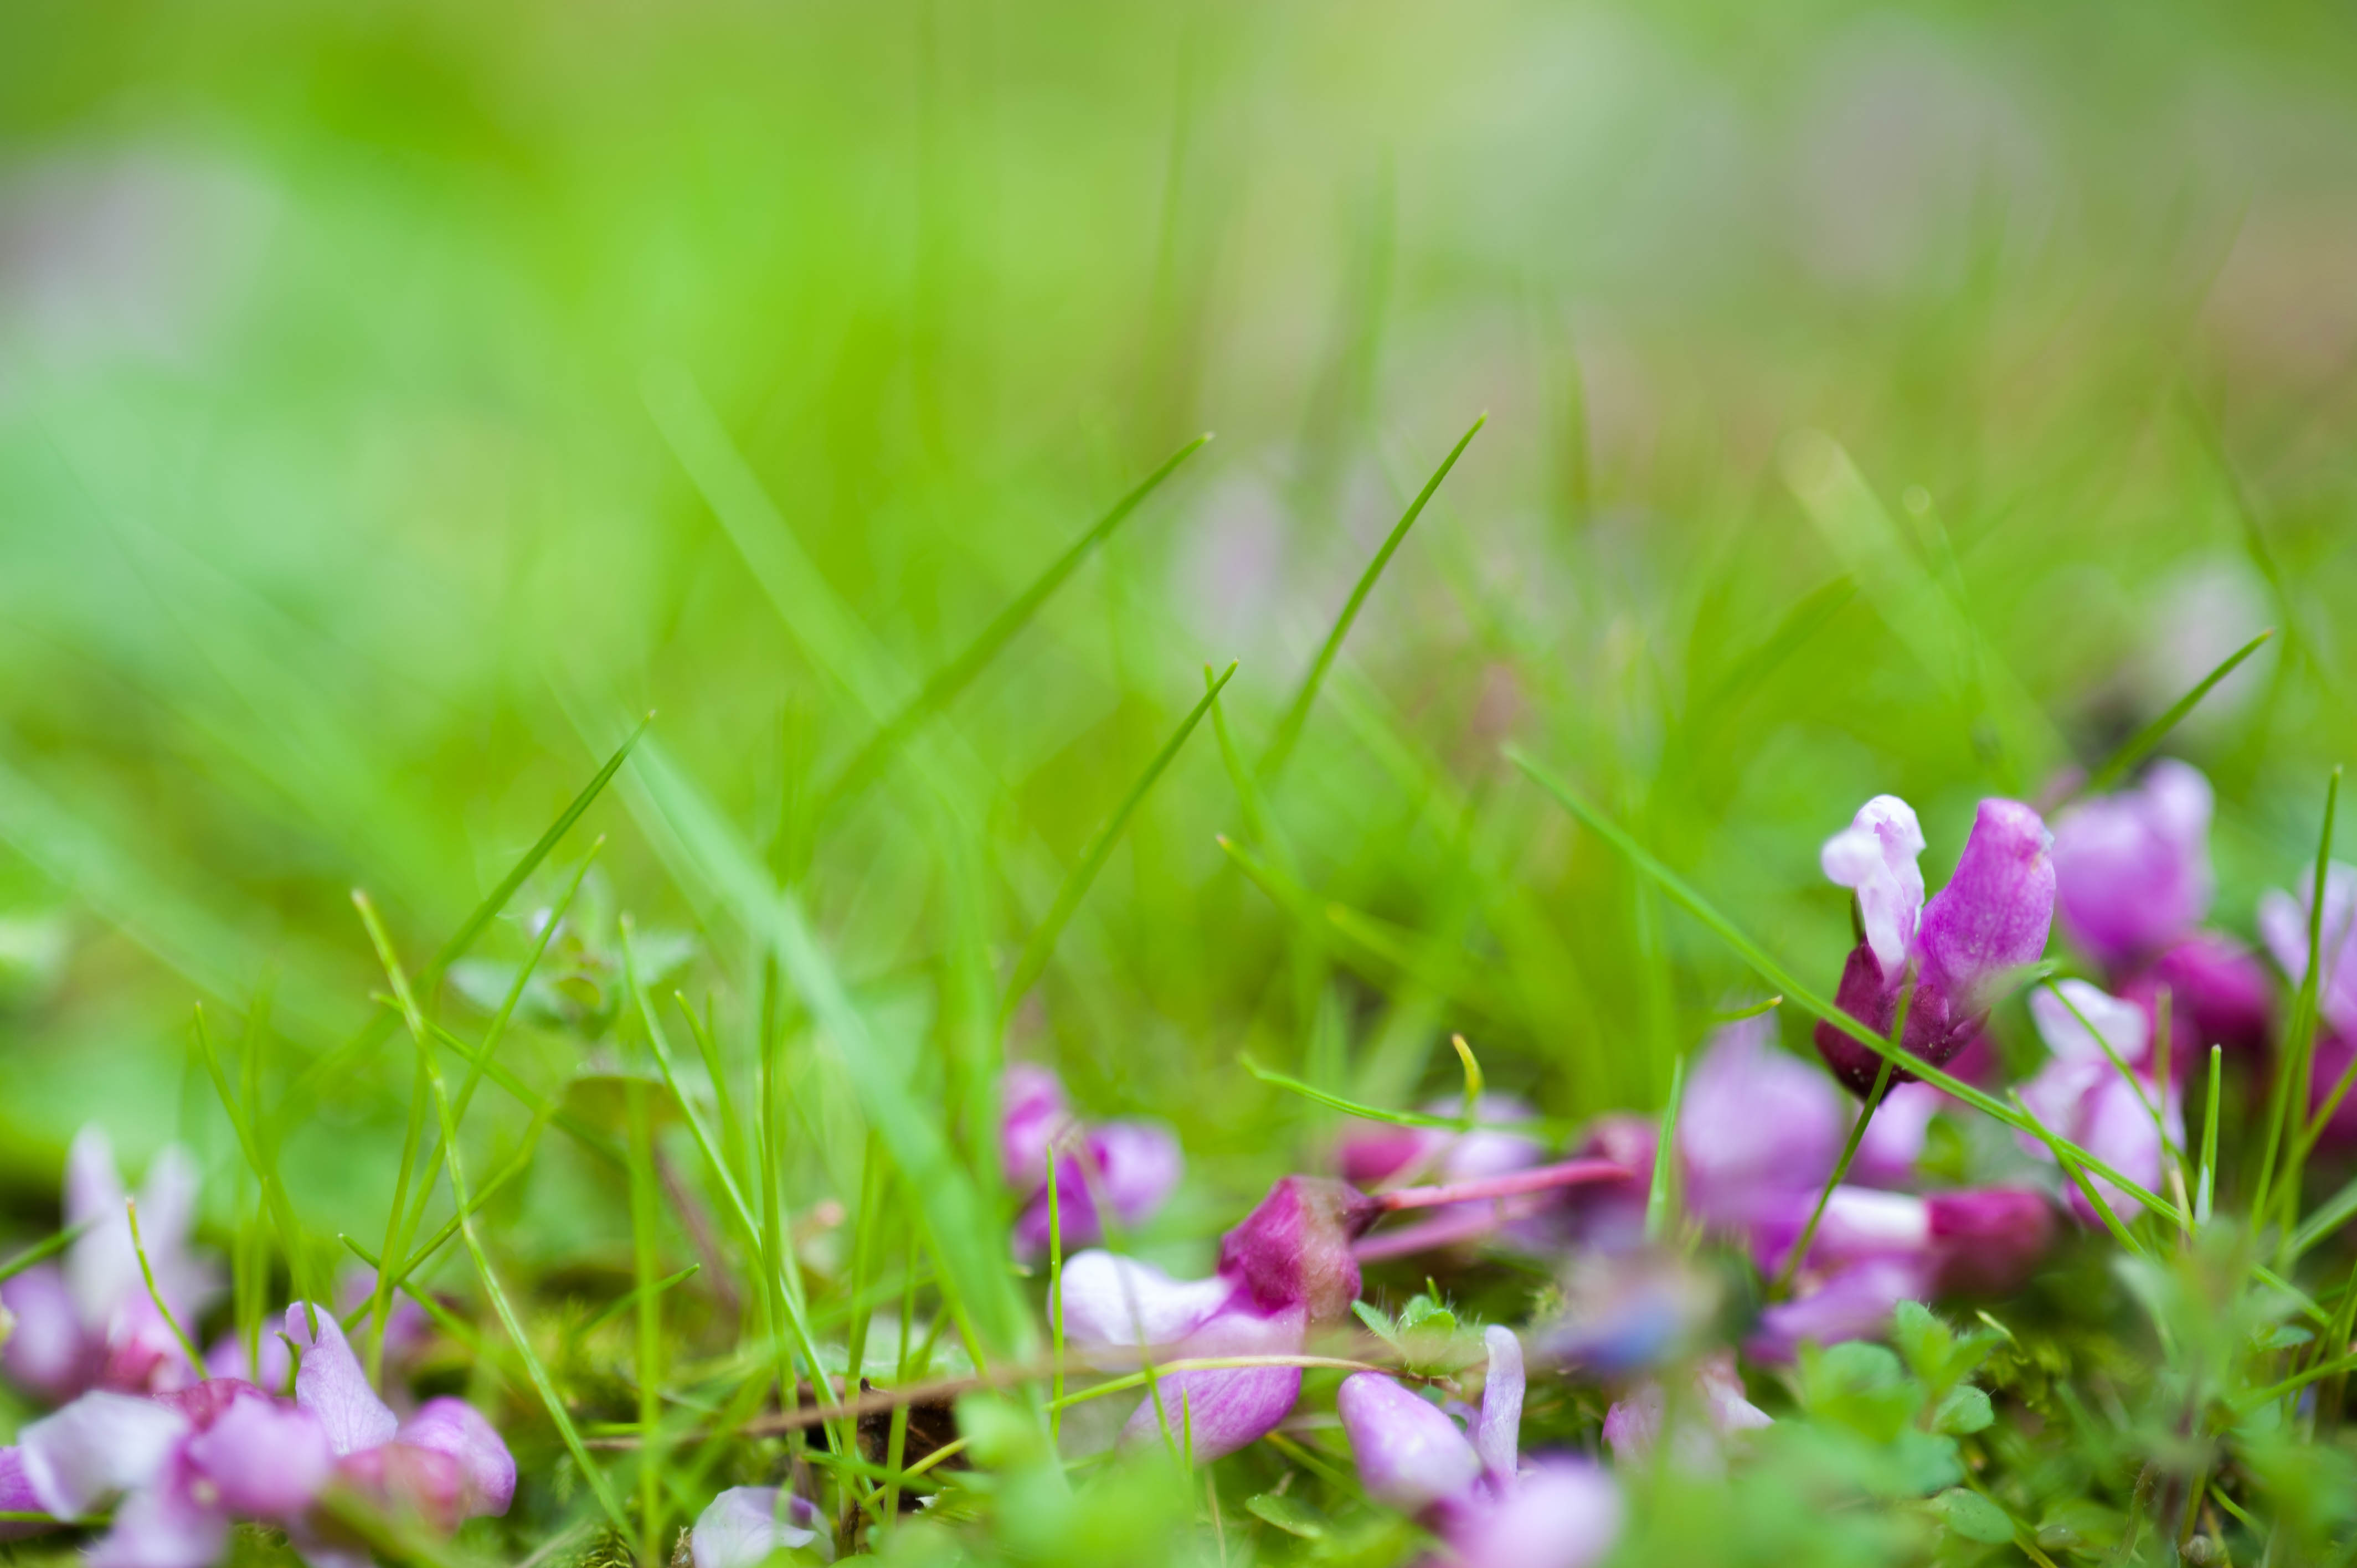 Pink flowers in green grass